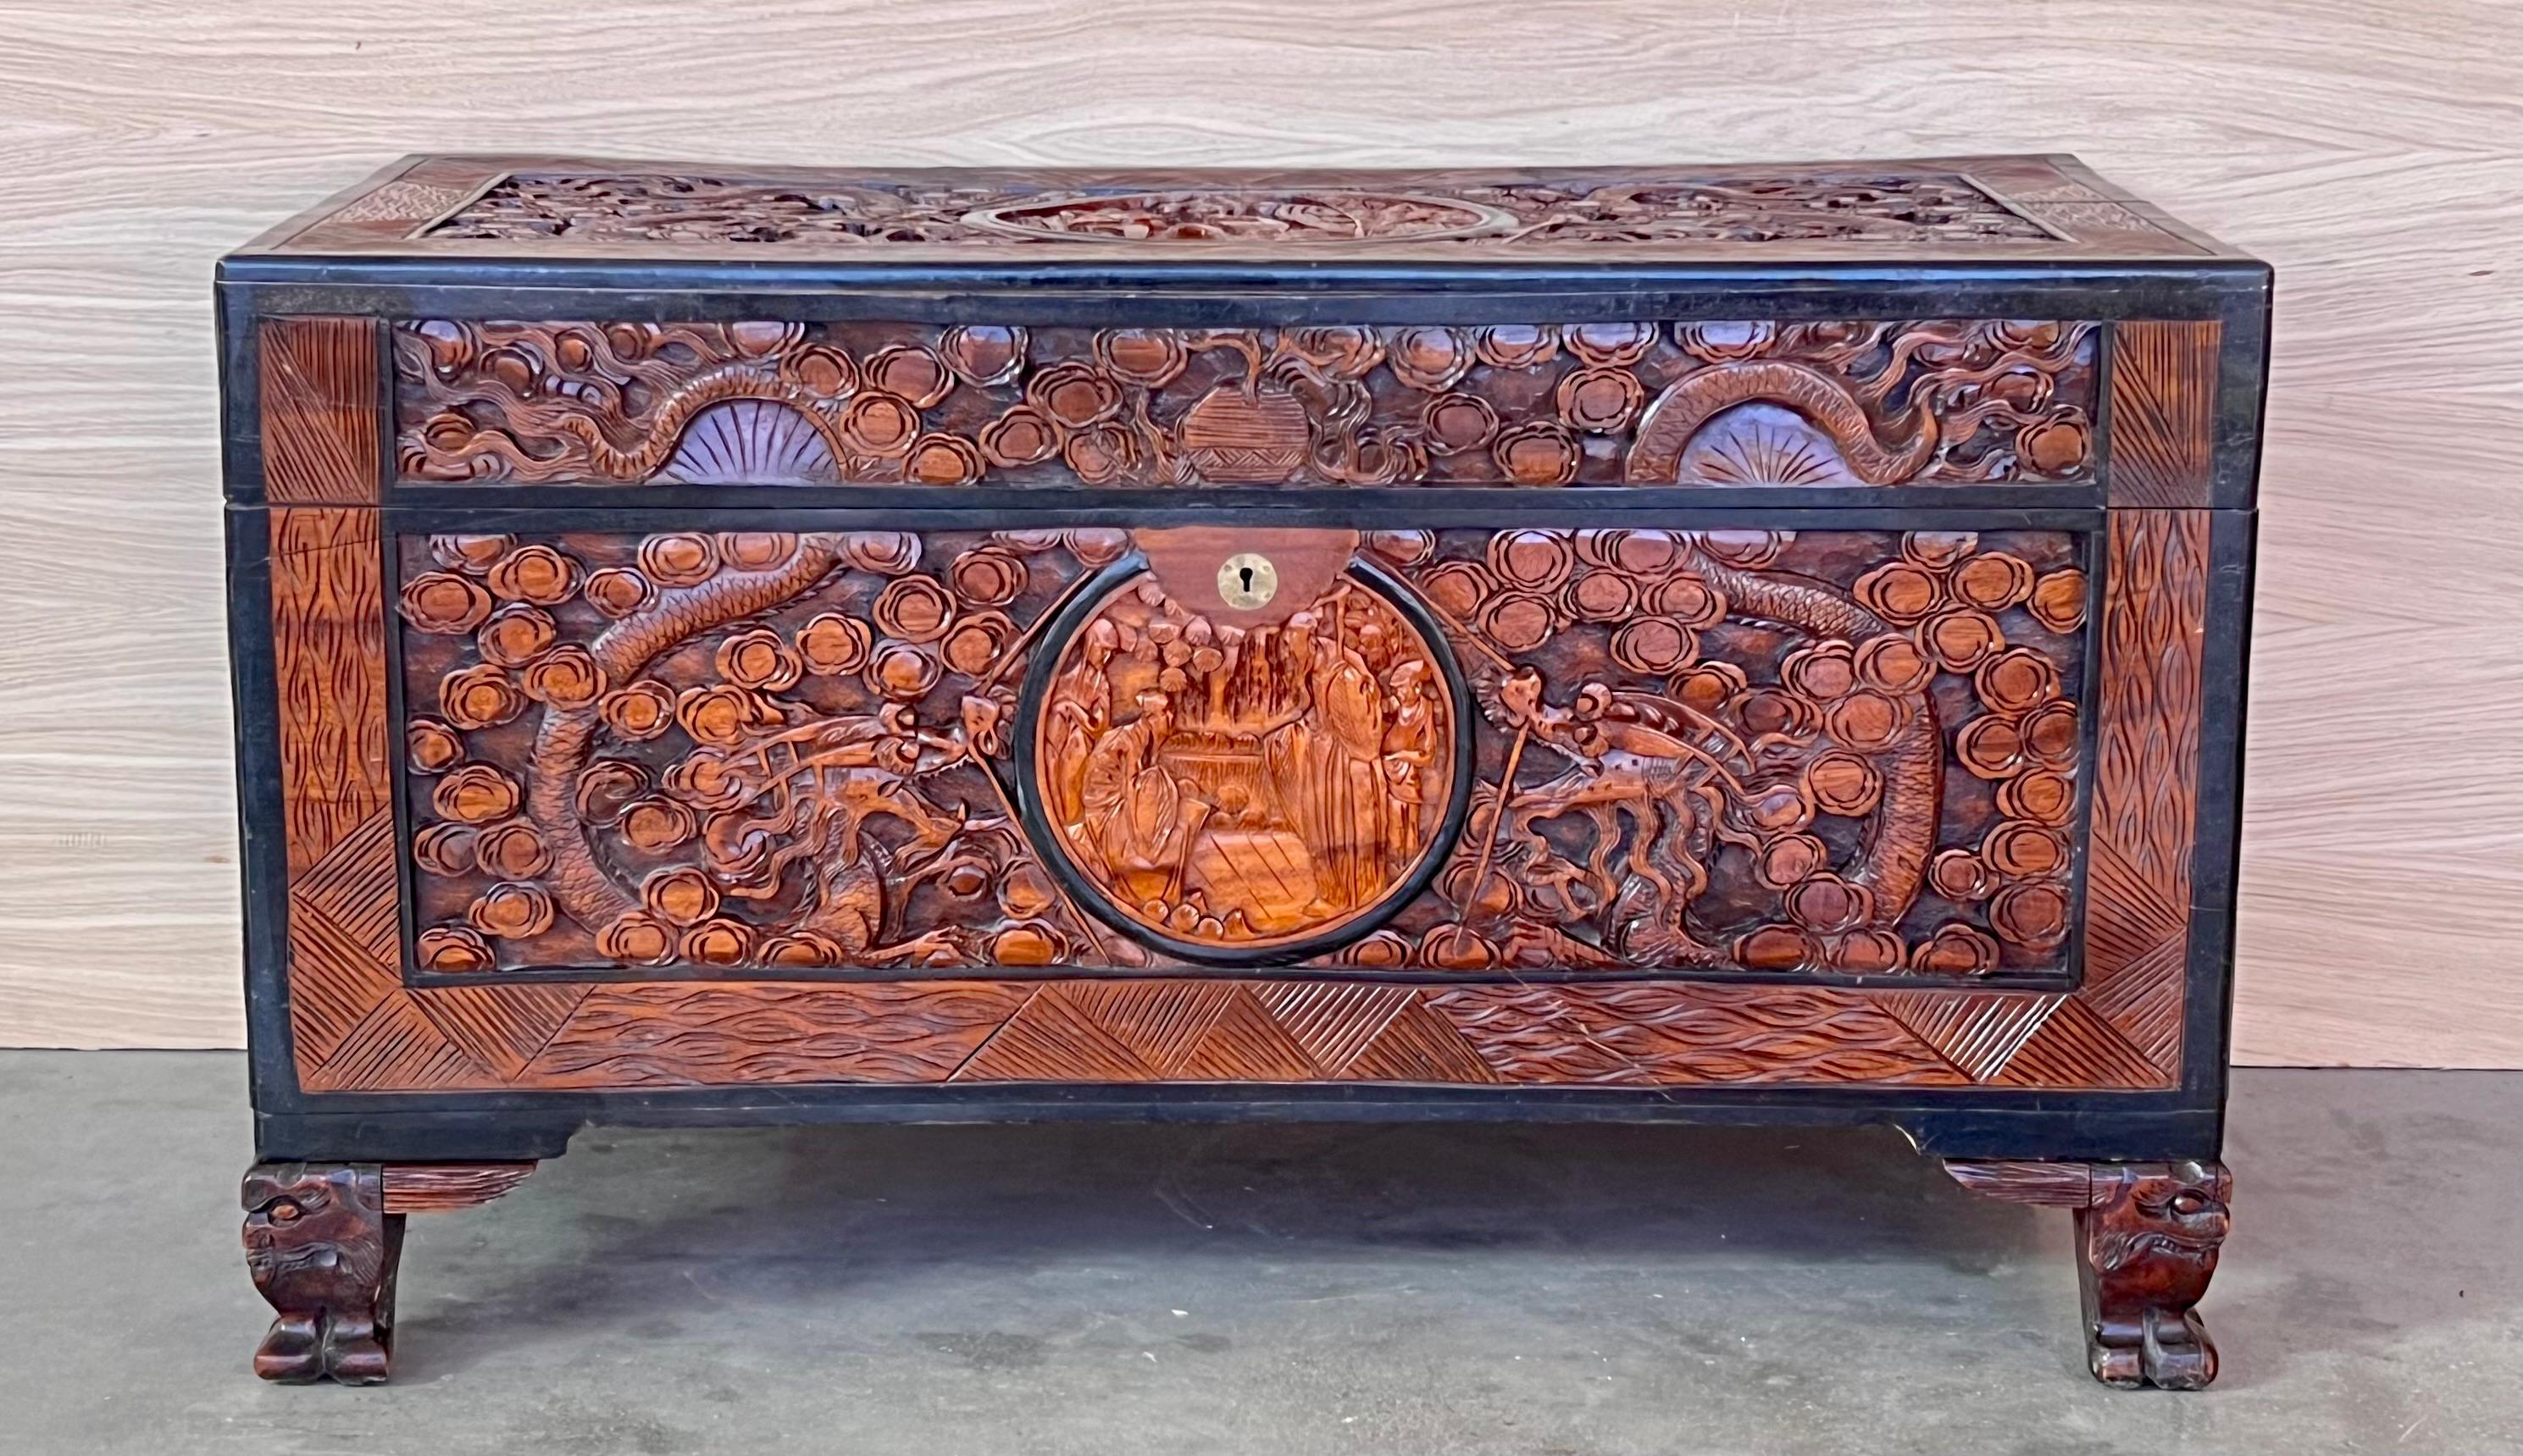 1900’s Chinese export Camphor wood travelling chest which has been ornately carved throughout   A good looking and well made piece, this is a medium size, ideal for storage linens or using as a footstool or coffee table. The carving is very detailed